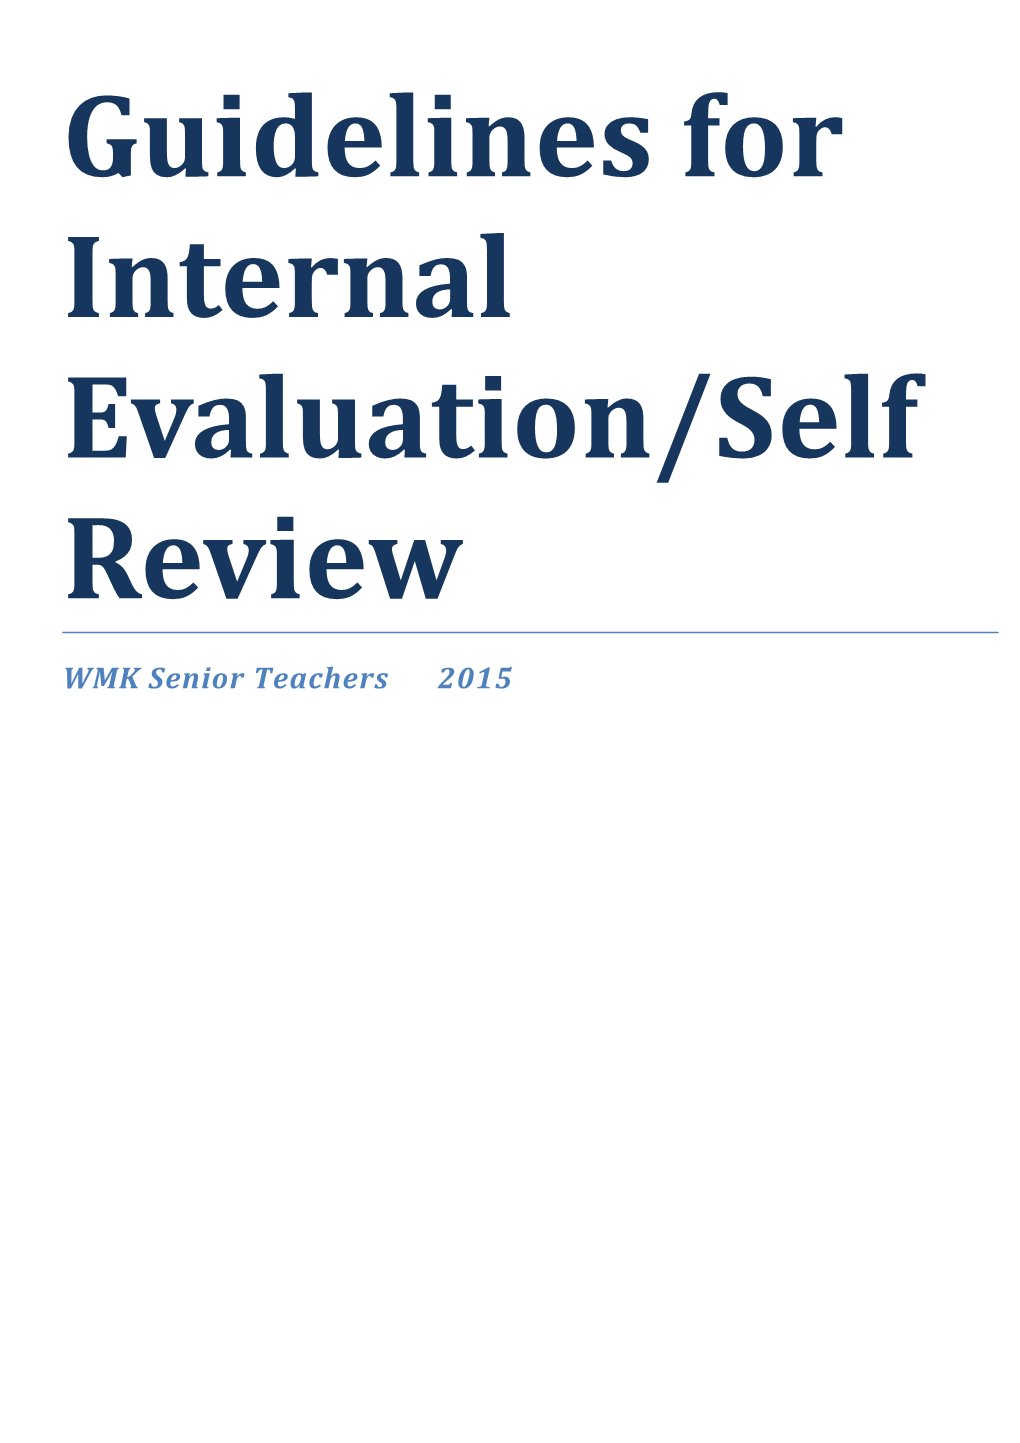 Guidelines for Internal Evaluation/Self Review